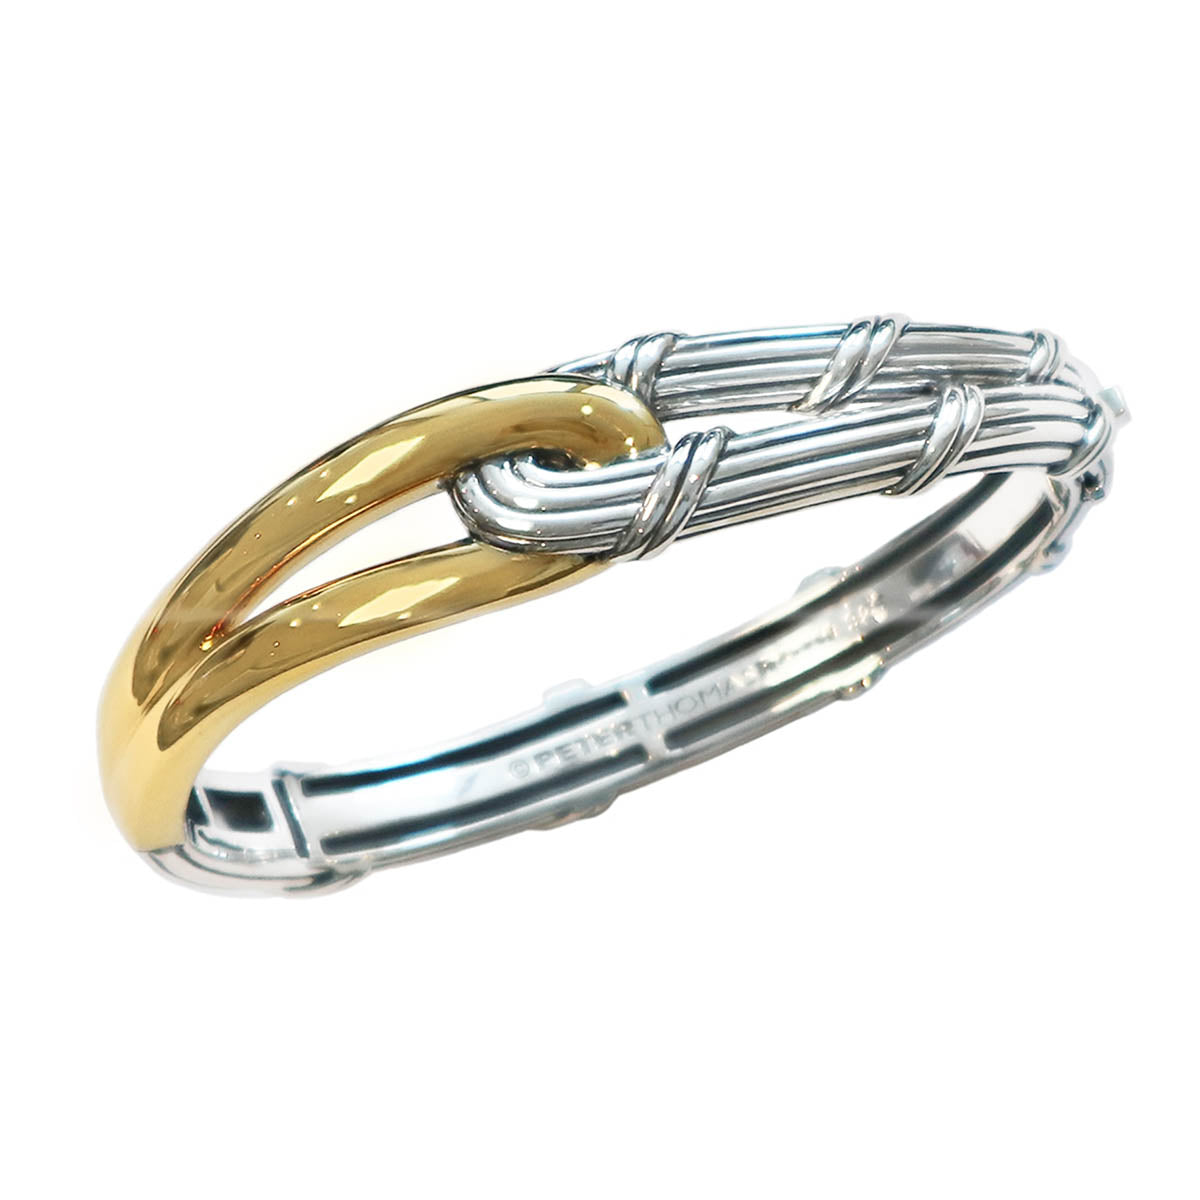 Southampton Knot Oval Cuff in two tone sterling silver